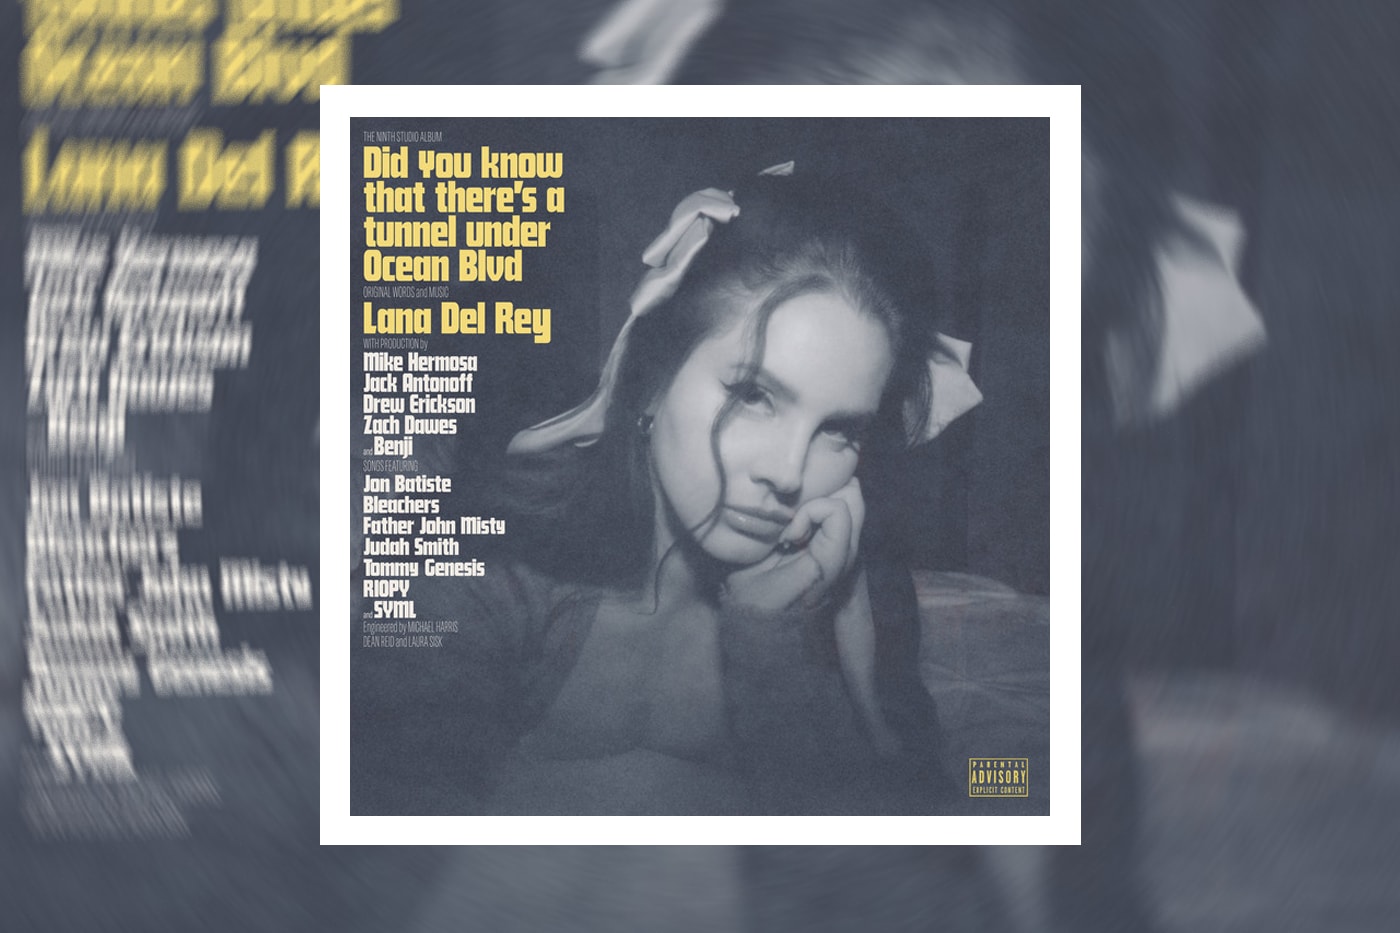 Lana Del Rey 全新專輯《Did You Know That There’s A Tunnel Under Ocean Blvd》正式發行